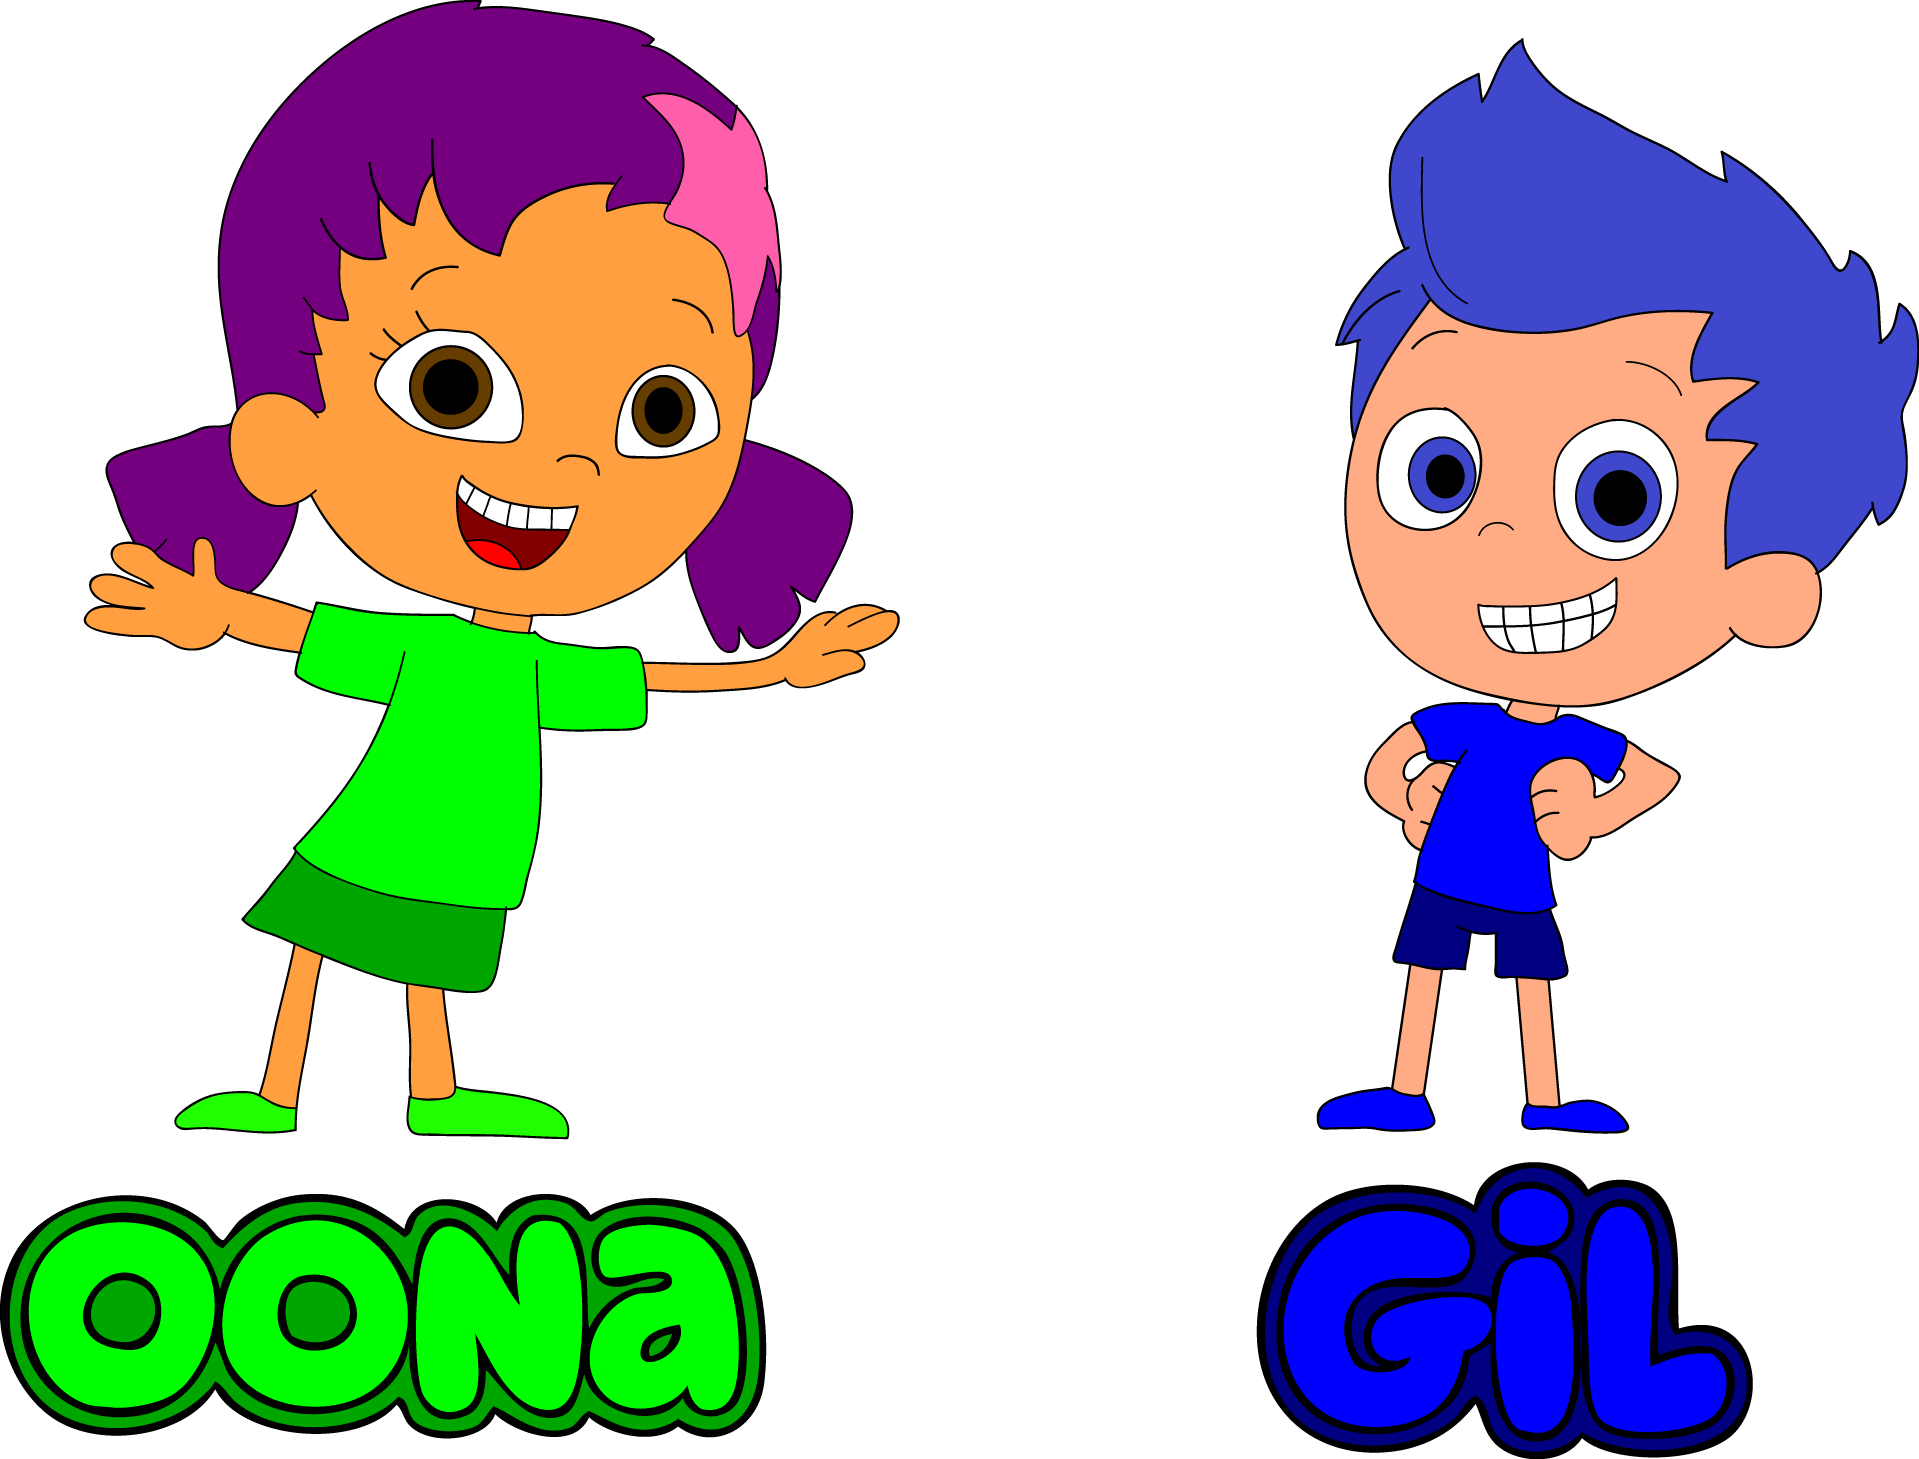 Fascinating Bubble Guppies Clip Art Medium Size - Bubble Guppies Oona And Gil (1919x1459)